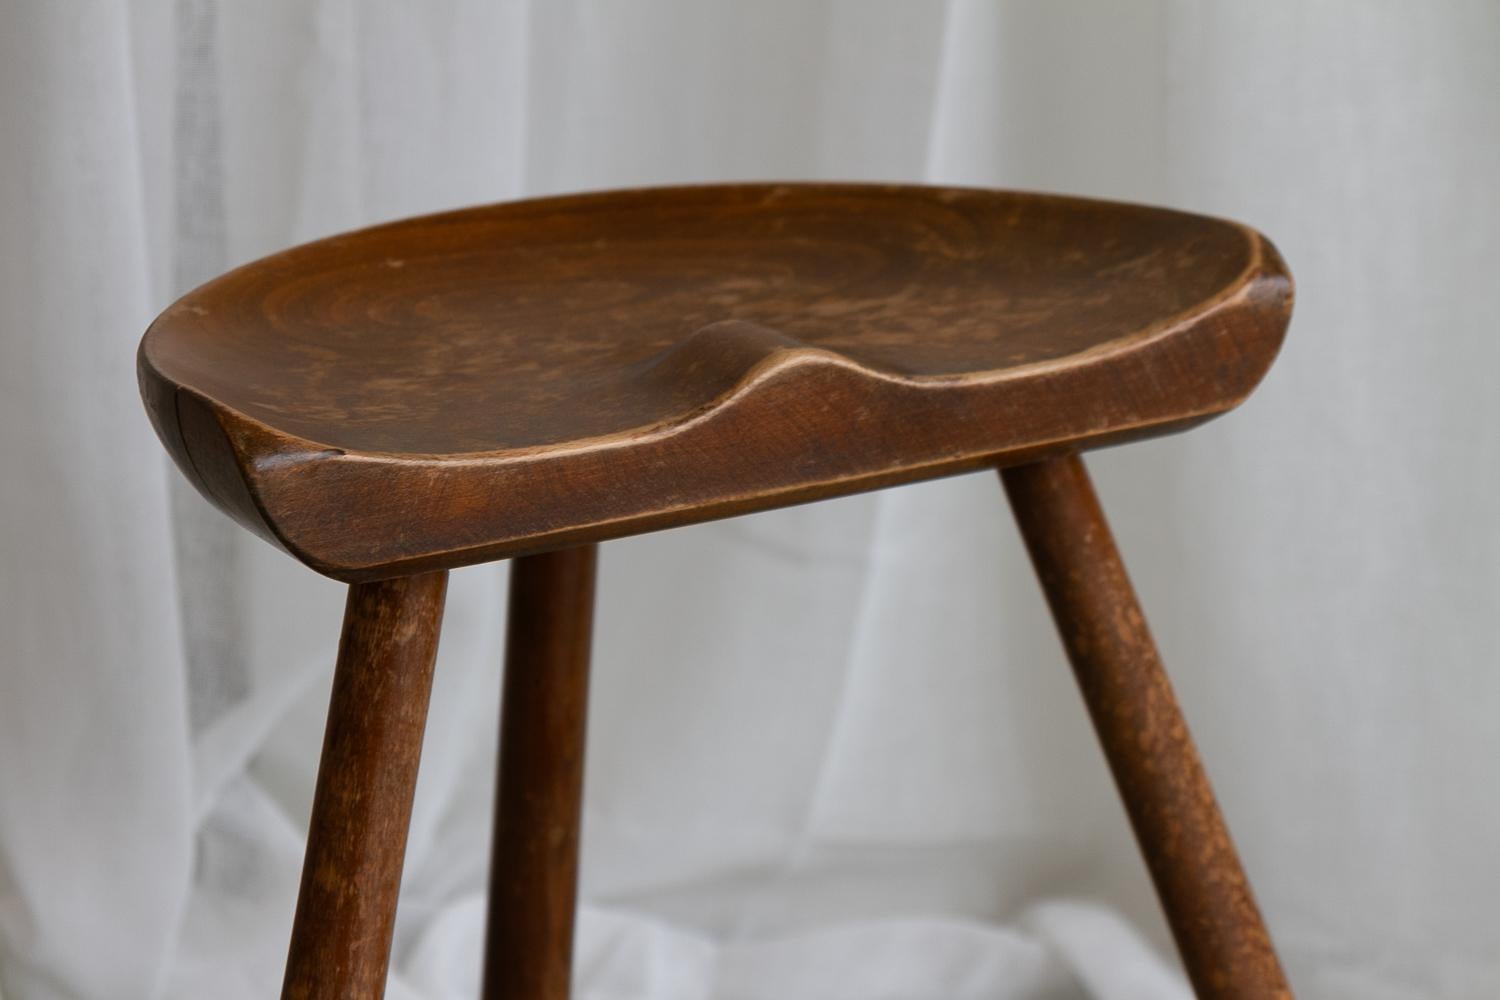 Vintage Danish Shoemaker Chair, 1930s.
Three legged hand-carved shoemakers stool or milk stool in solid stained beech. Club shaped legs with stretchers for footrest and stability.

Stable vintage condition with lots of authentic patina. Gently